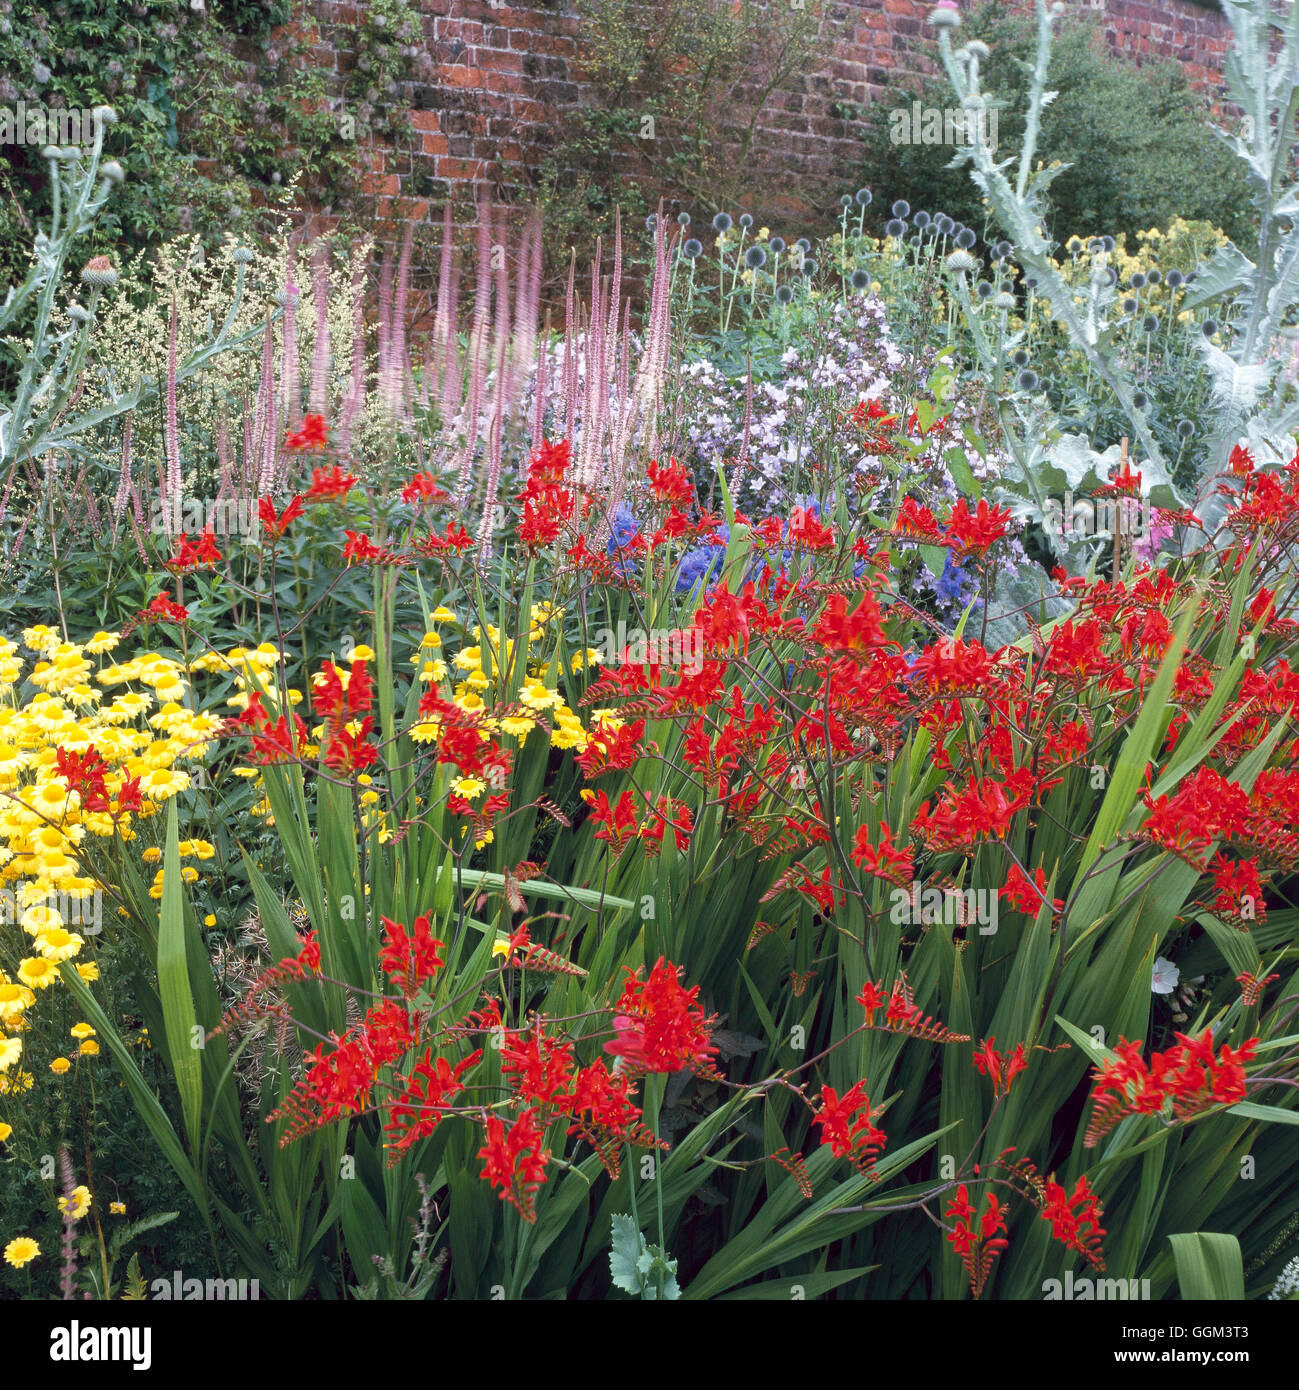 Perennial Border - (Please credit: Photos Horticultural/ Arley Hall and Gardens  Cheshire)   PGN089976  Compulsory Cre Stock Photo